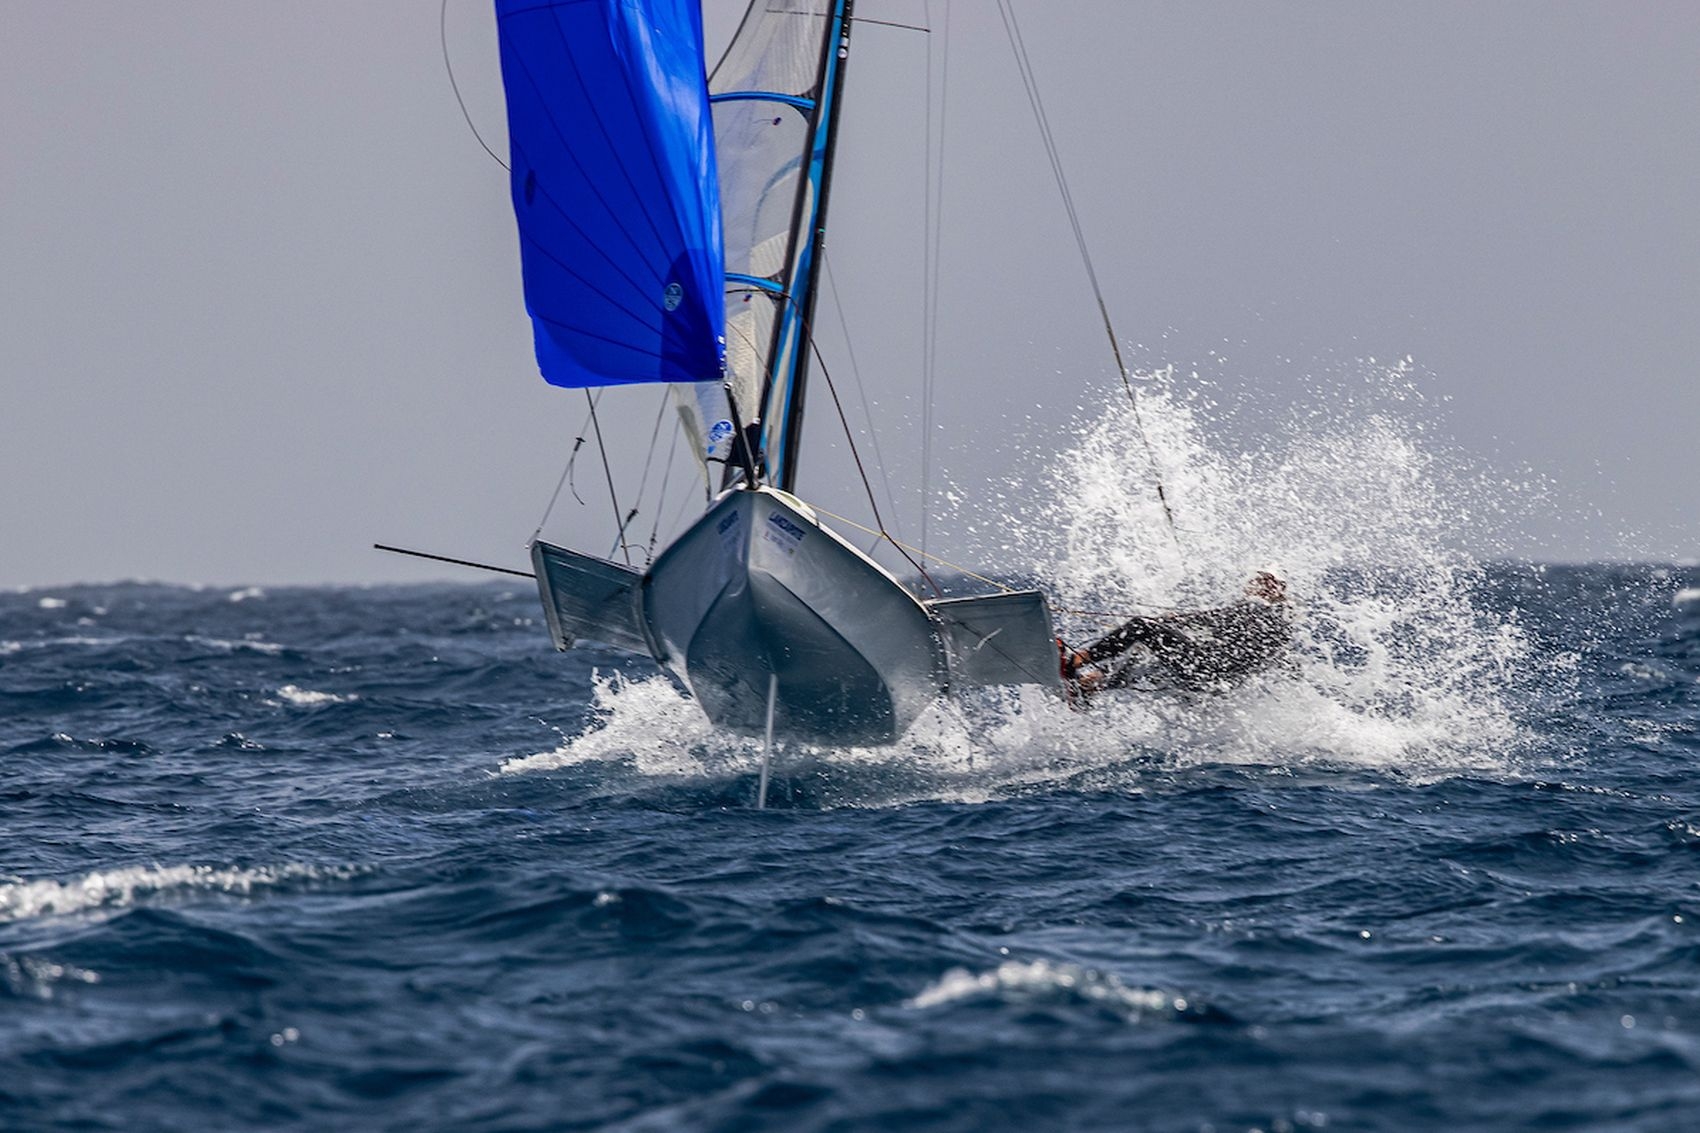  49er, 49erFX, Nacra 17  Olympic Qualifier Europe  Lanzarote ESP  Final results, Stephanie Roble/Margaret Shea 8th